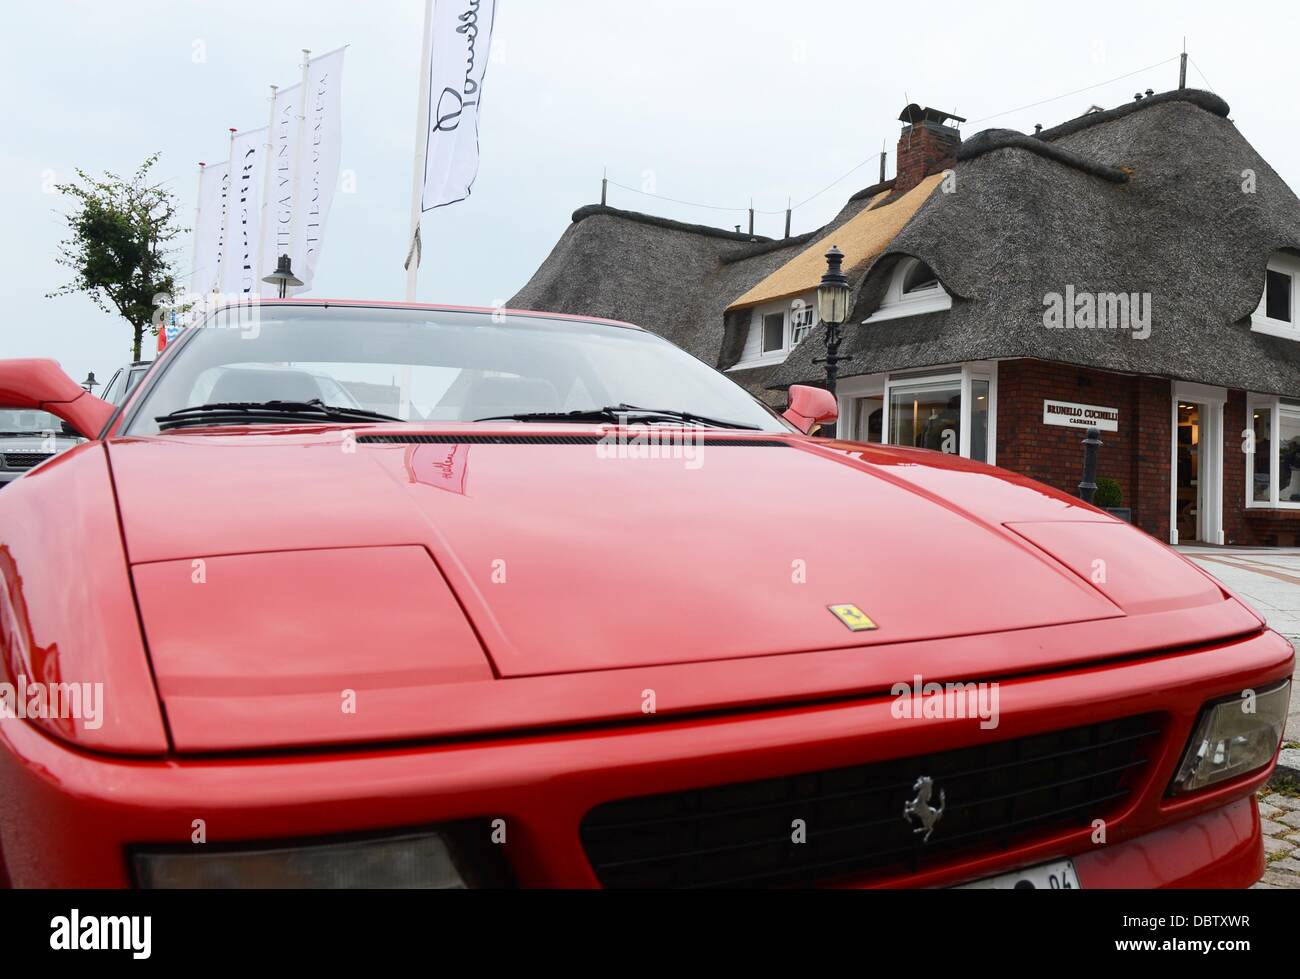 A red Ferrari stand in front of a thatched house in Kampen on the island of Sylt, Germany, 26 July 2013. Photo: Jens Kalaene Stock Photo